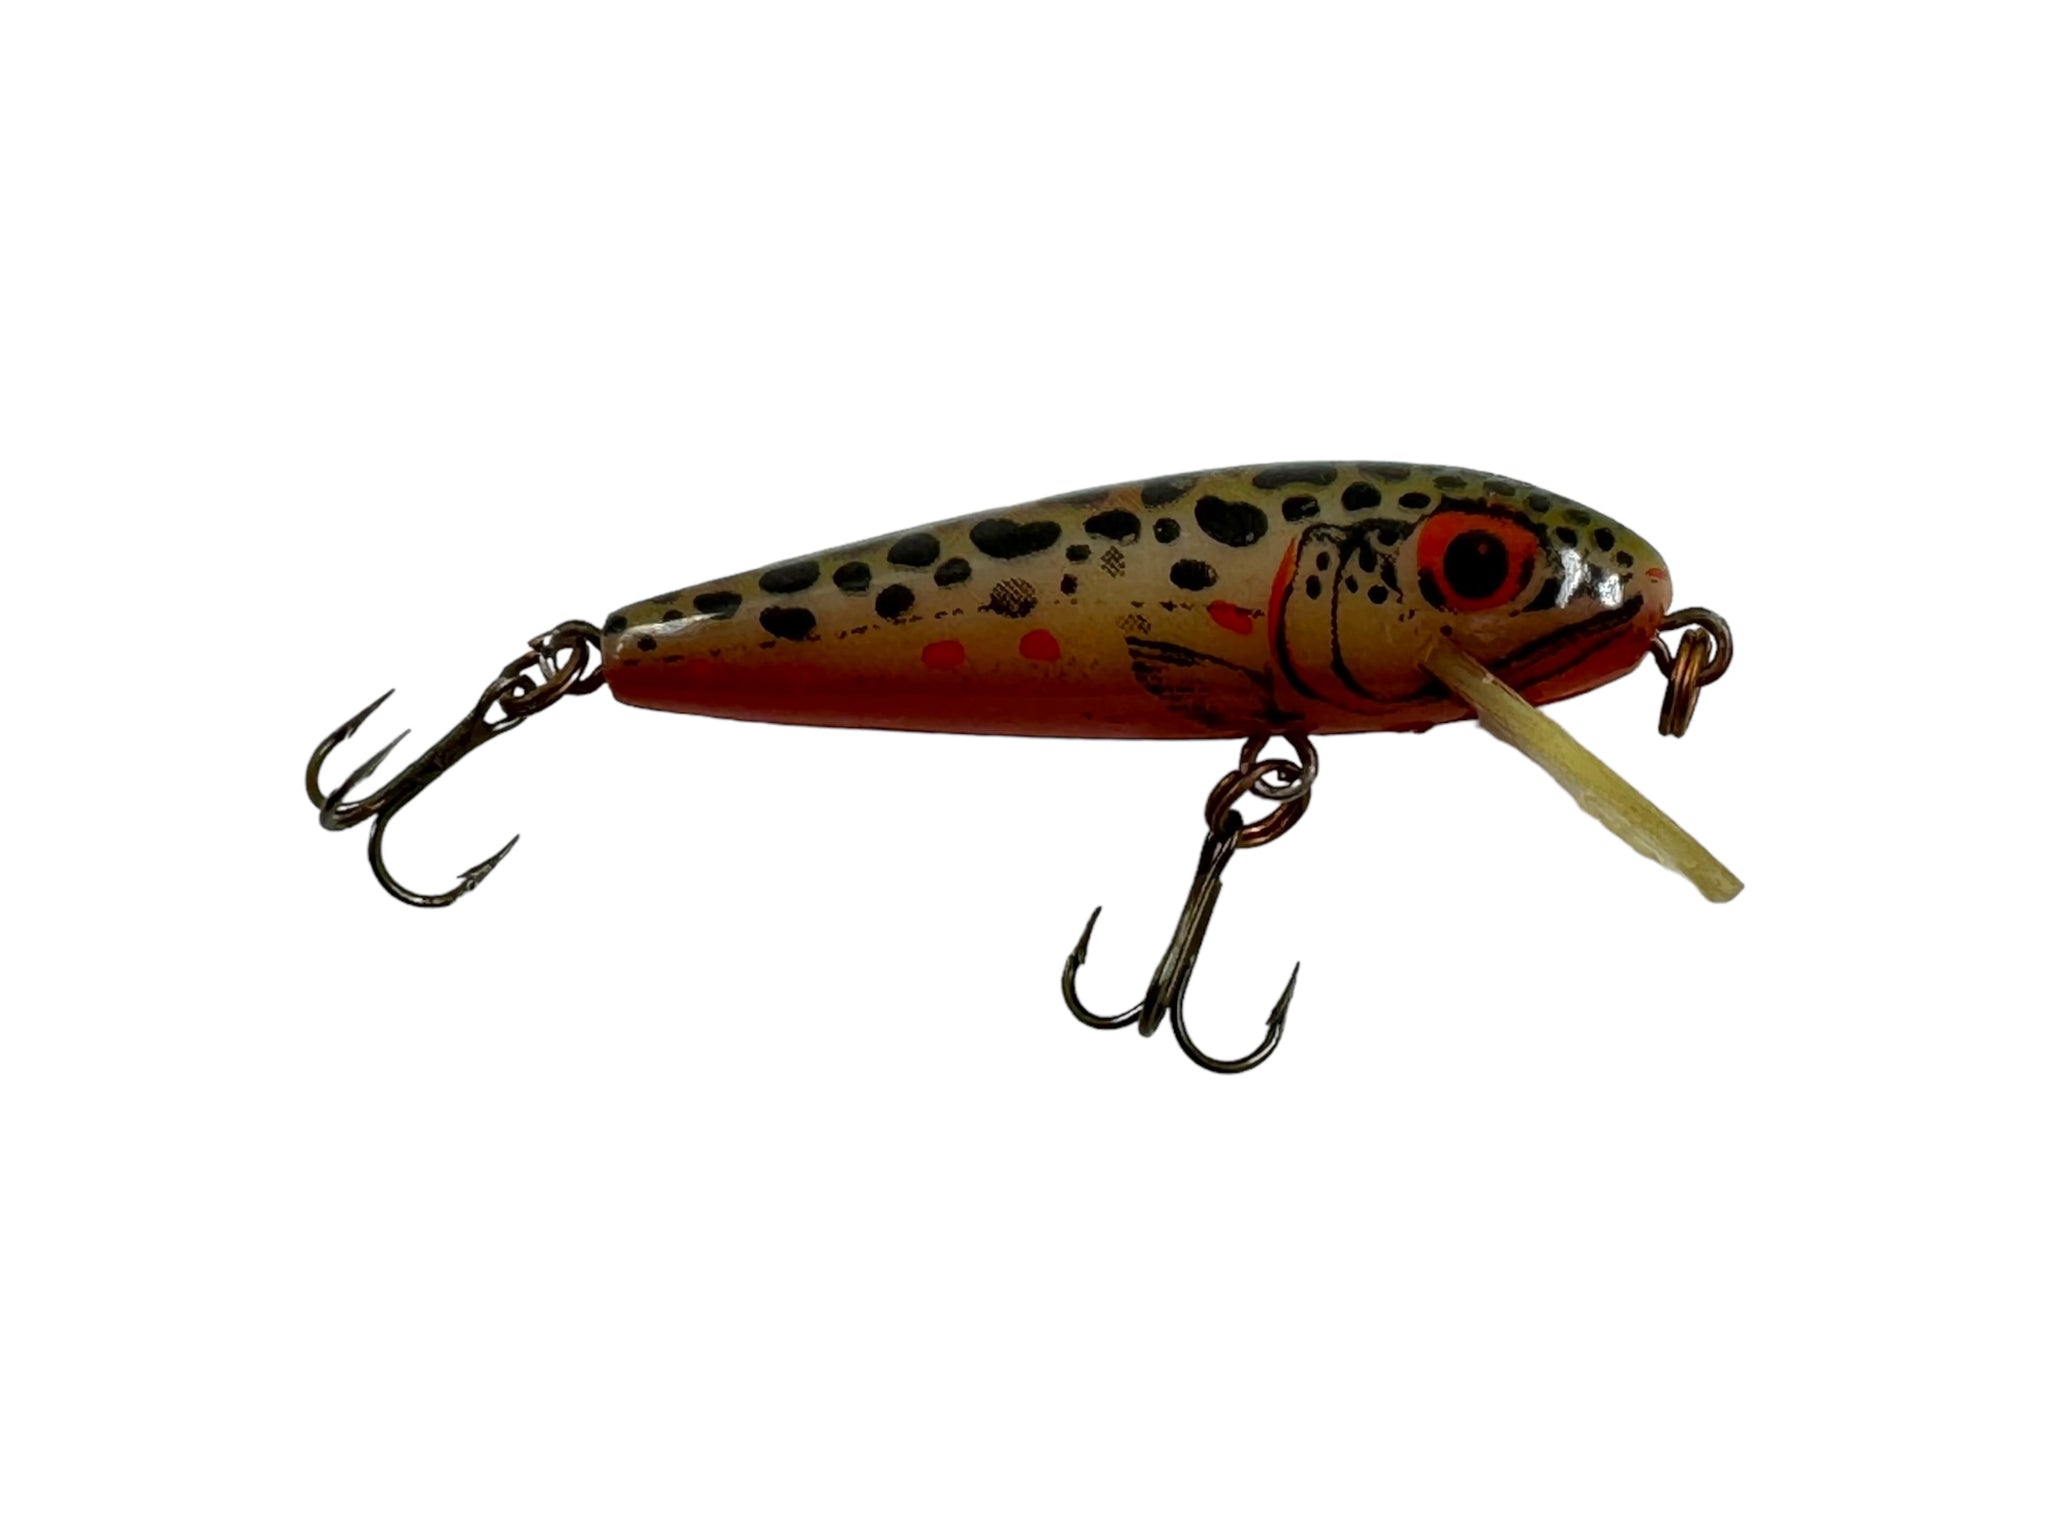 Ultralight REBEL LURES F49 MINNOW Fishing Lure • BROWN TROUT – Toad Tackle